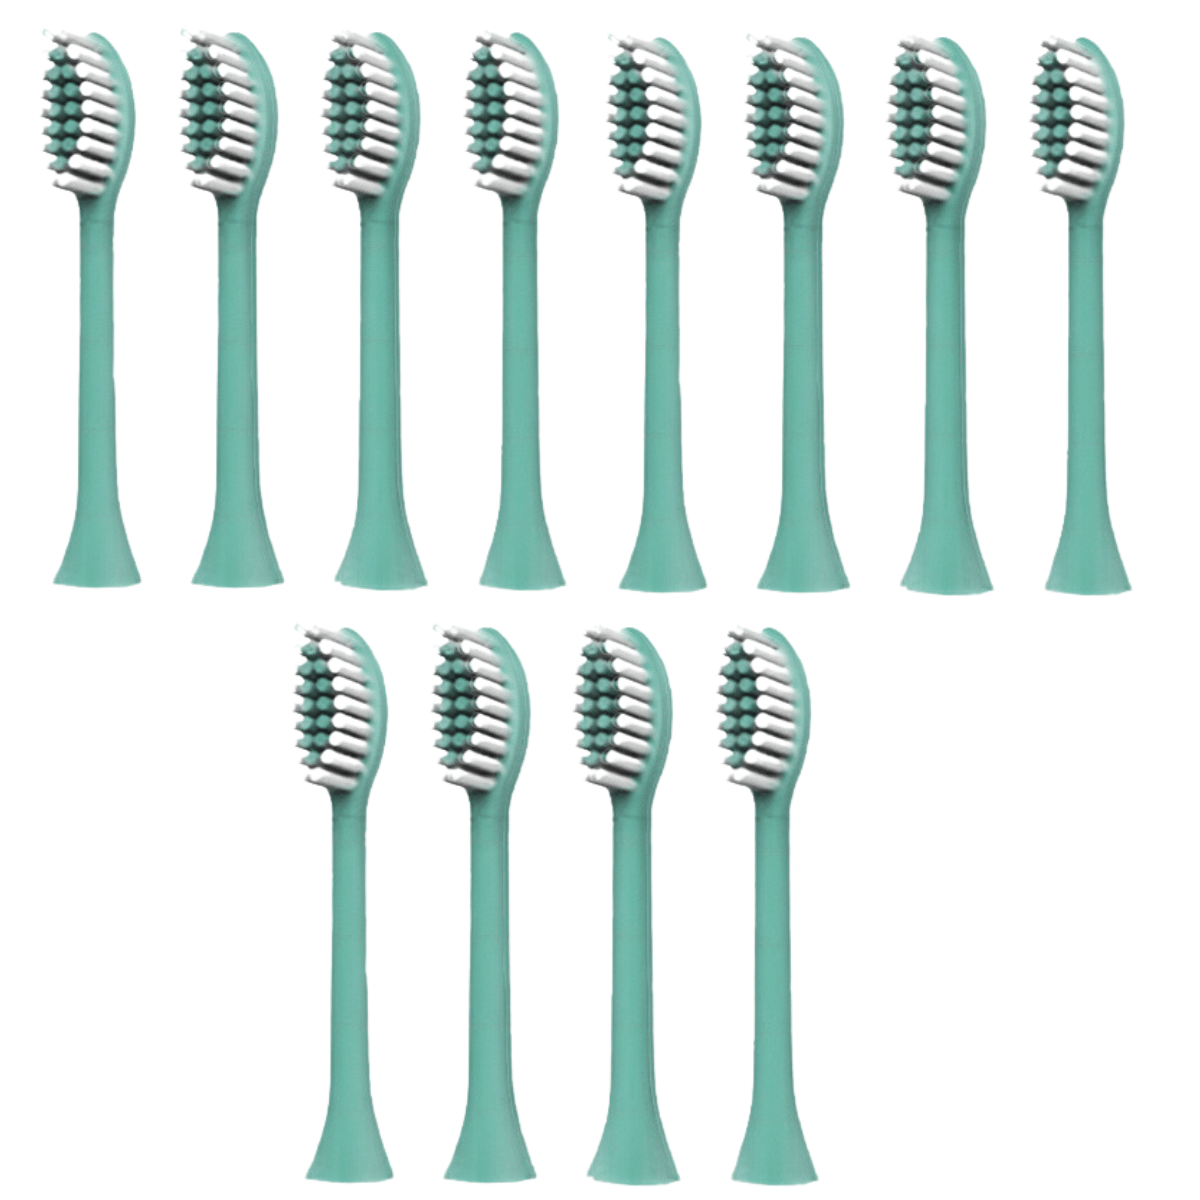 Attachment Heads (For Electric Toothbrush)